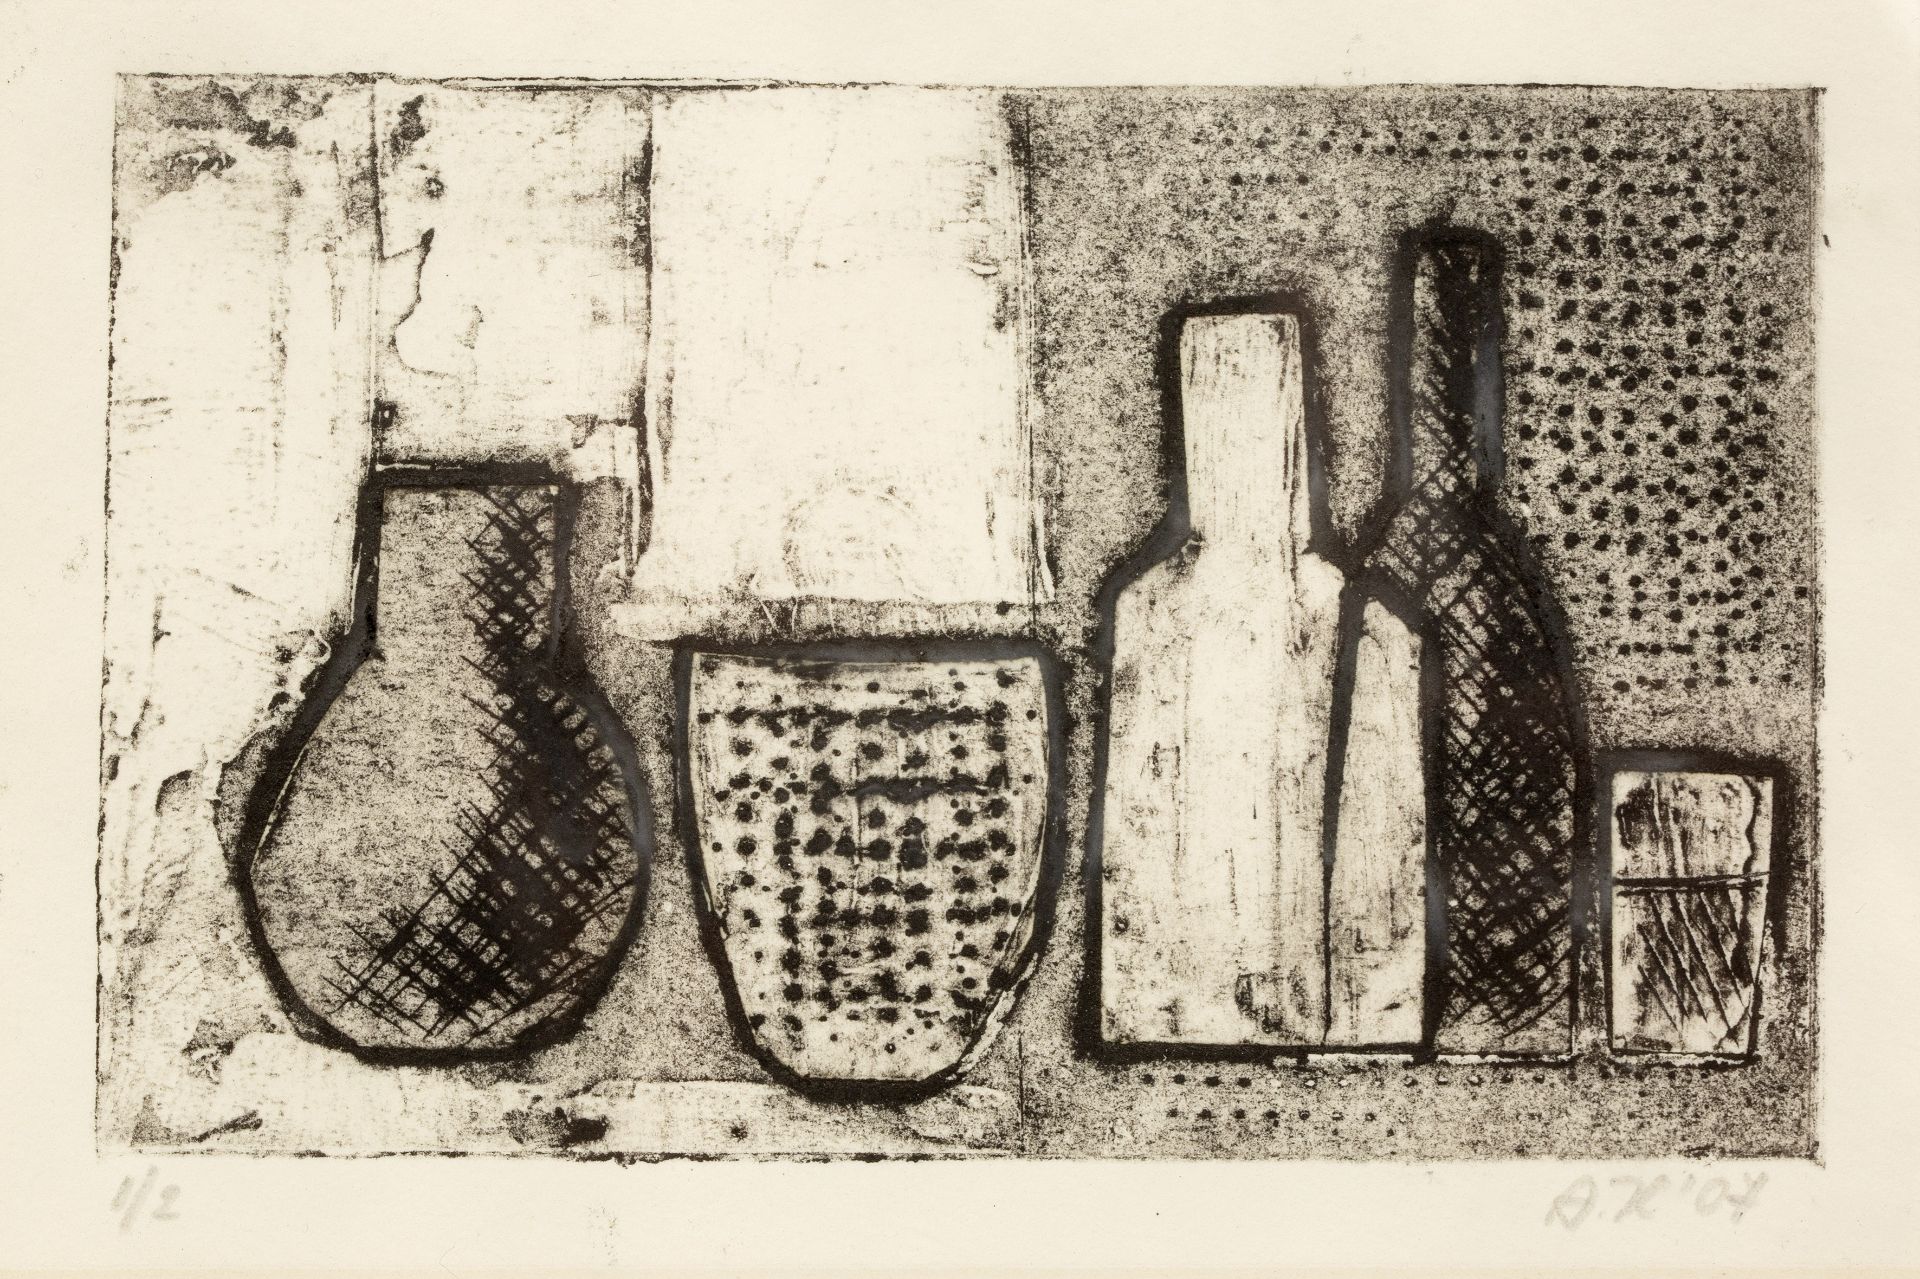 Annette H**** (Contemporary) 'Christmas 2007', etching, numbered 1/2, signed in pencil lower